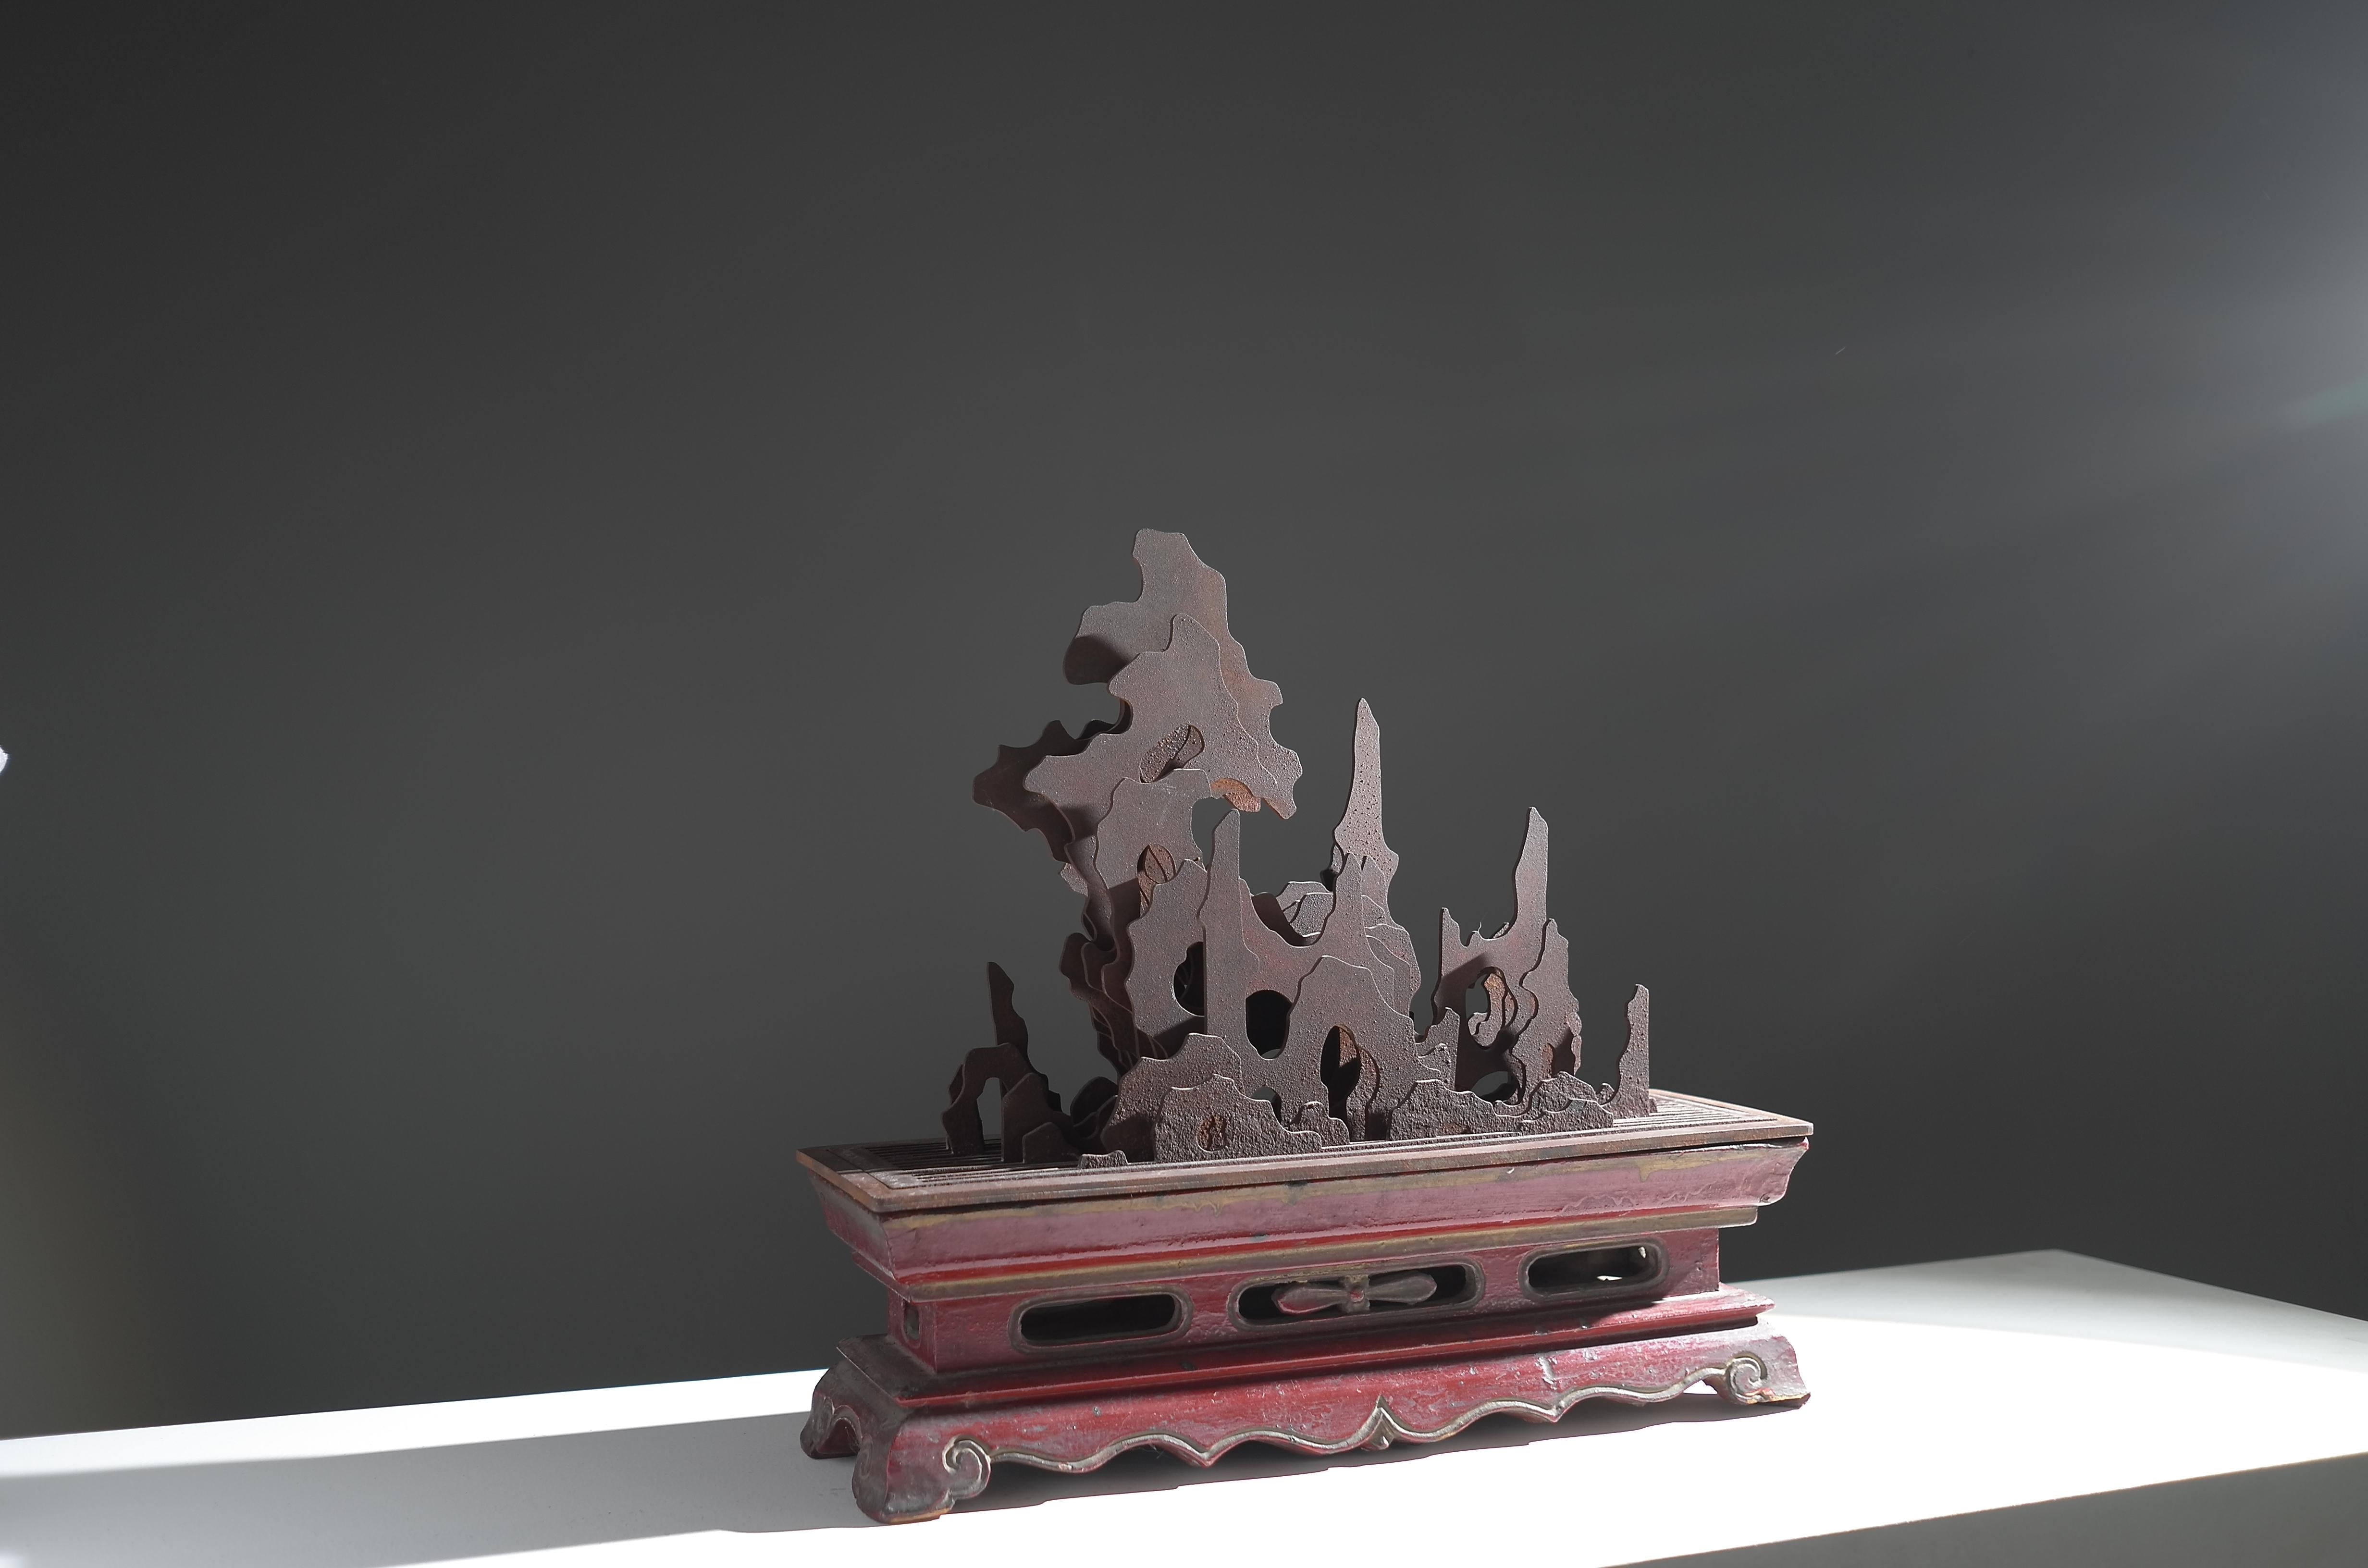 Modern Impressive Super-Flat Sculpture- Dynasty Qing Lacquer Wood- Untitled I - Brown Abstract Sculpture by Yang Dongying